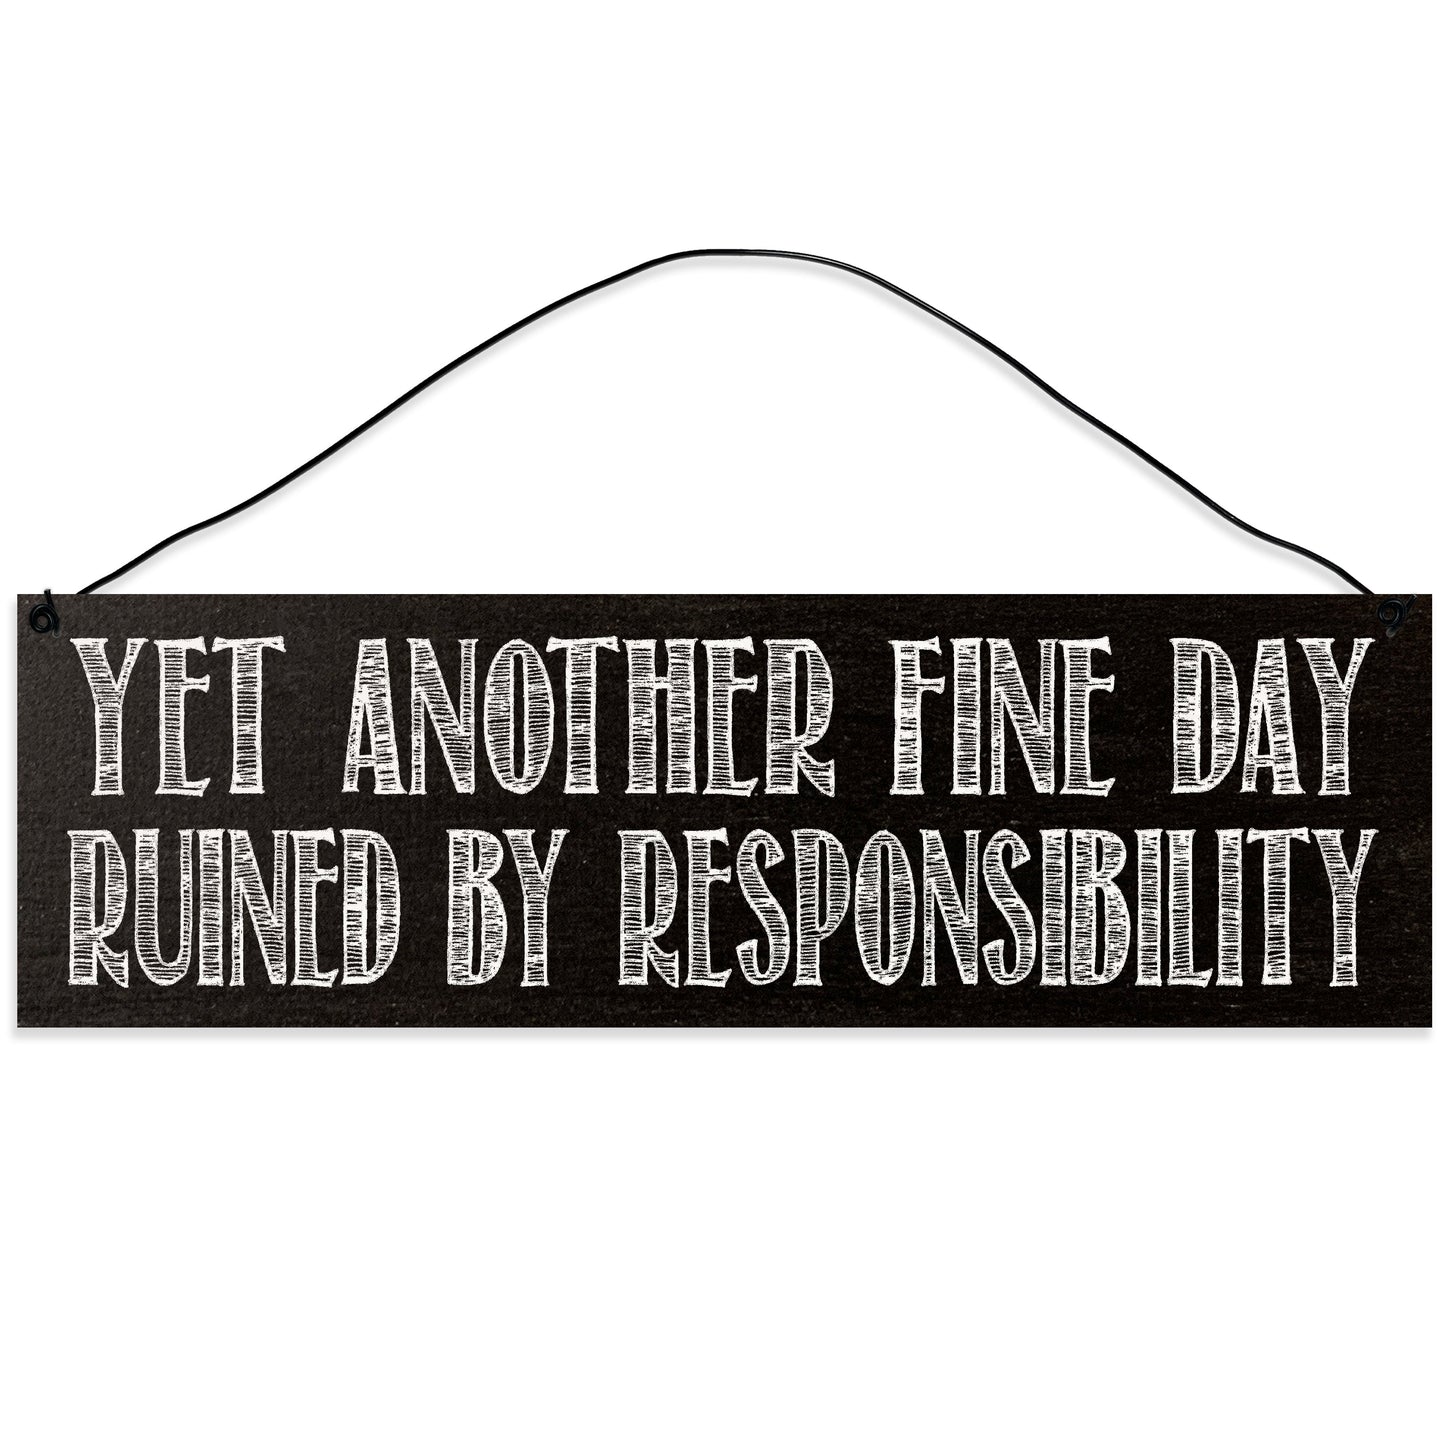 Sawyer's Mill - Yet Another Fine Day Ruined by Responsibility. Wood Sign for Home or Office. Measures 3x10 inches.